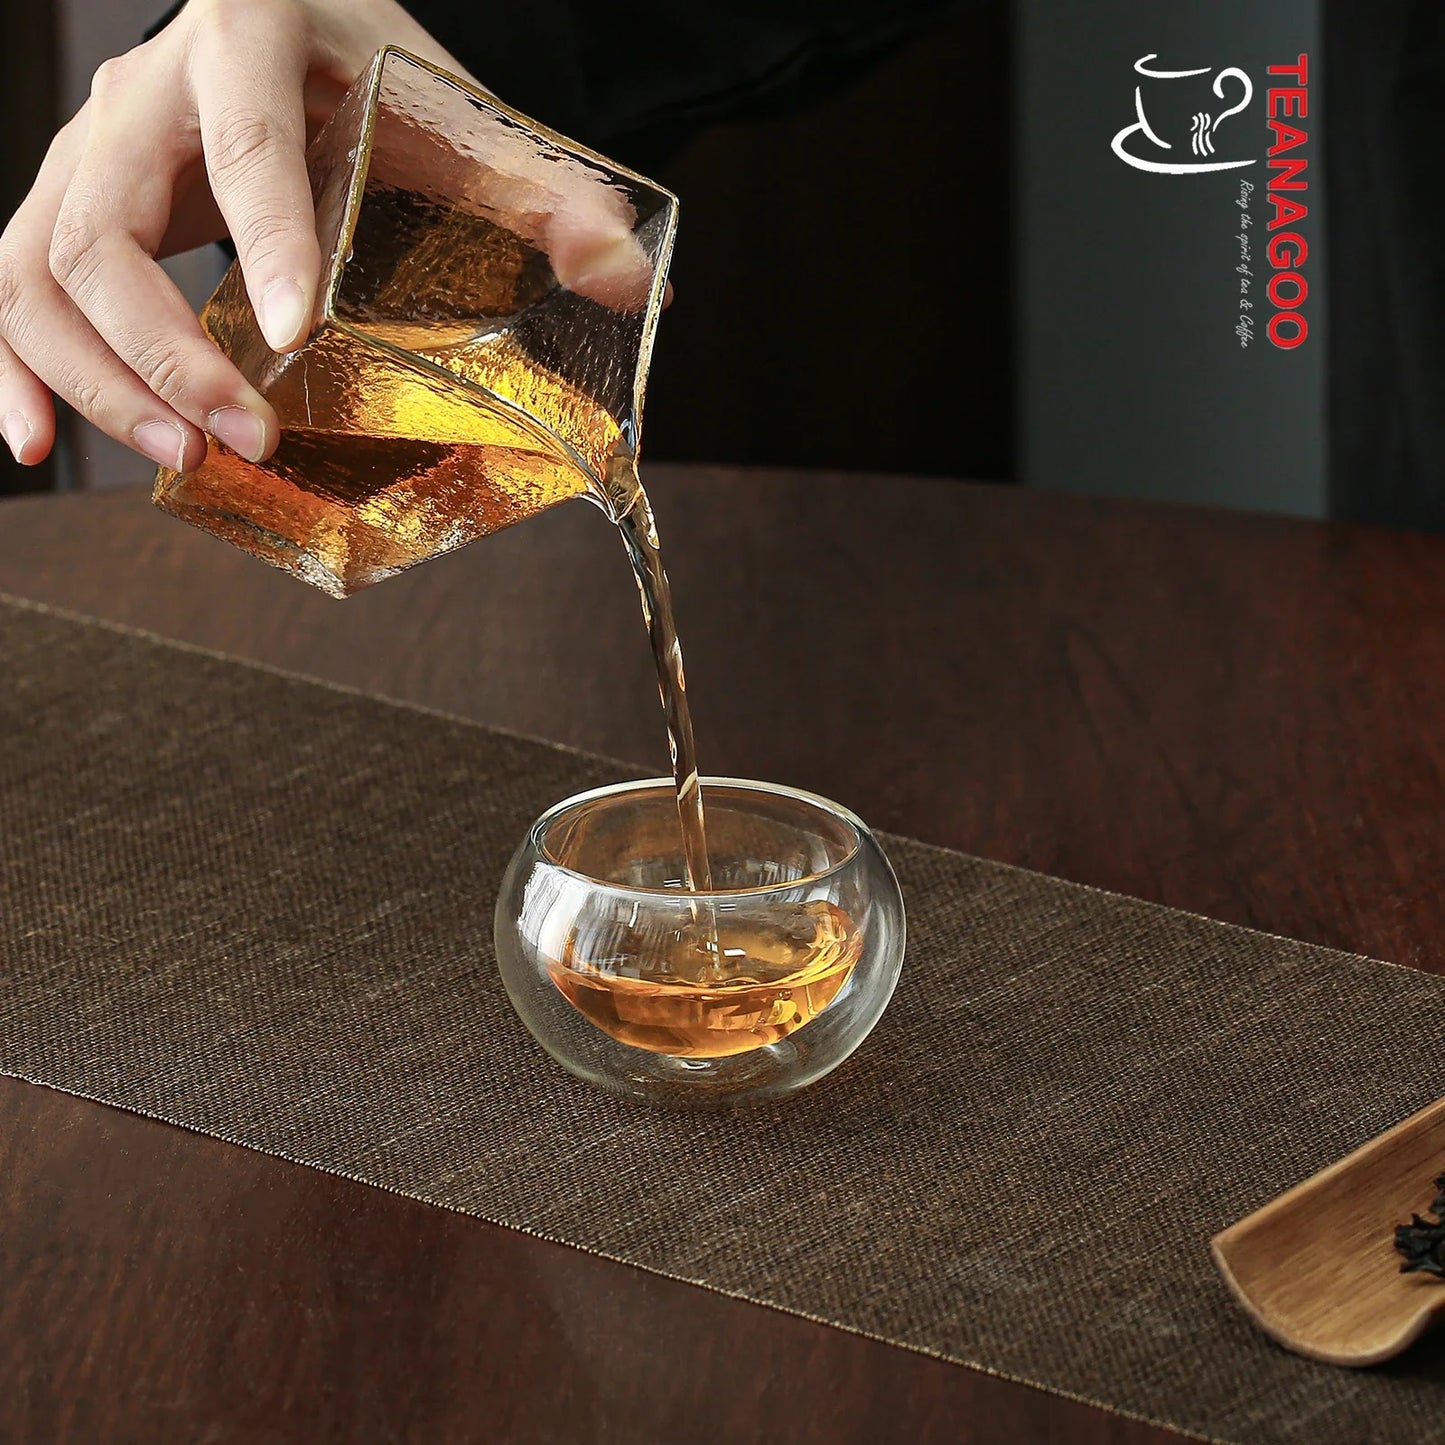 Handmade Double Wall Glass Prevent Burns Teacups as Gifts